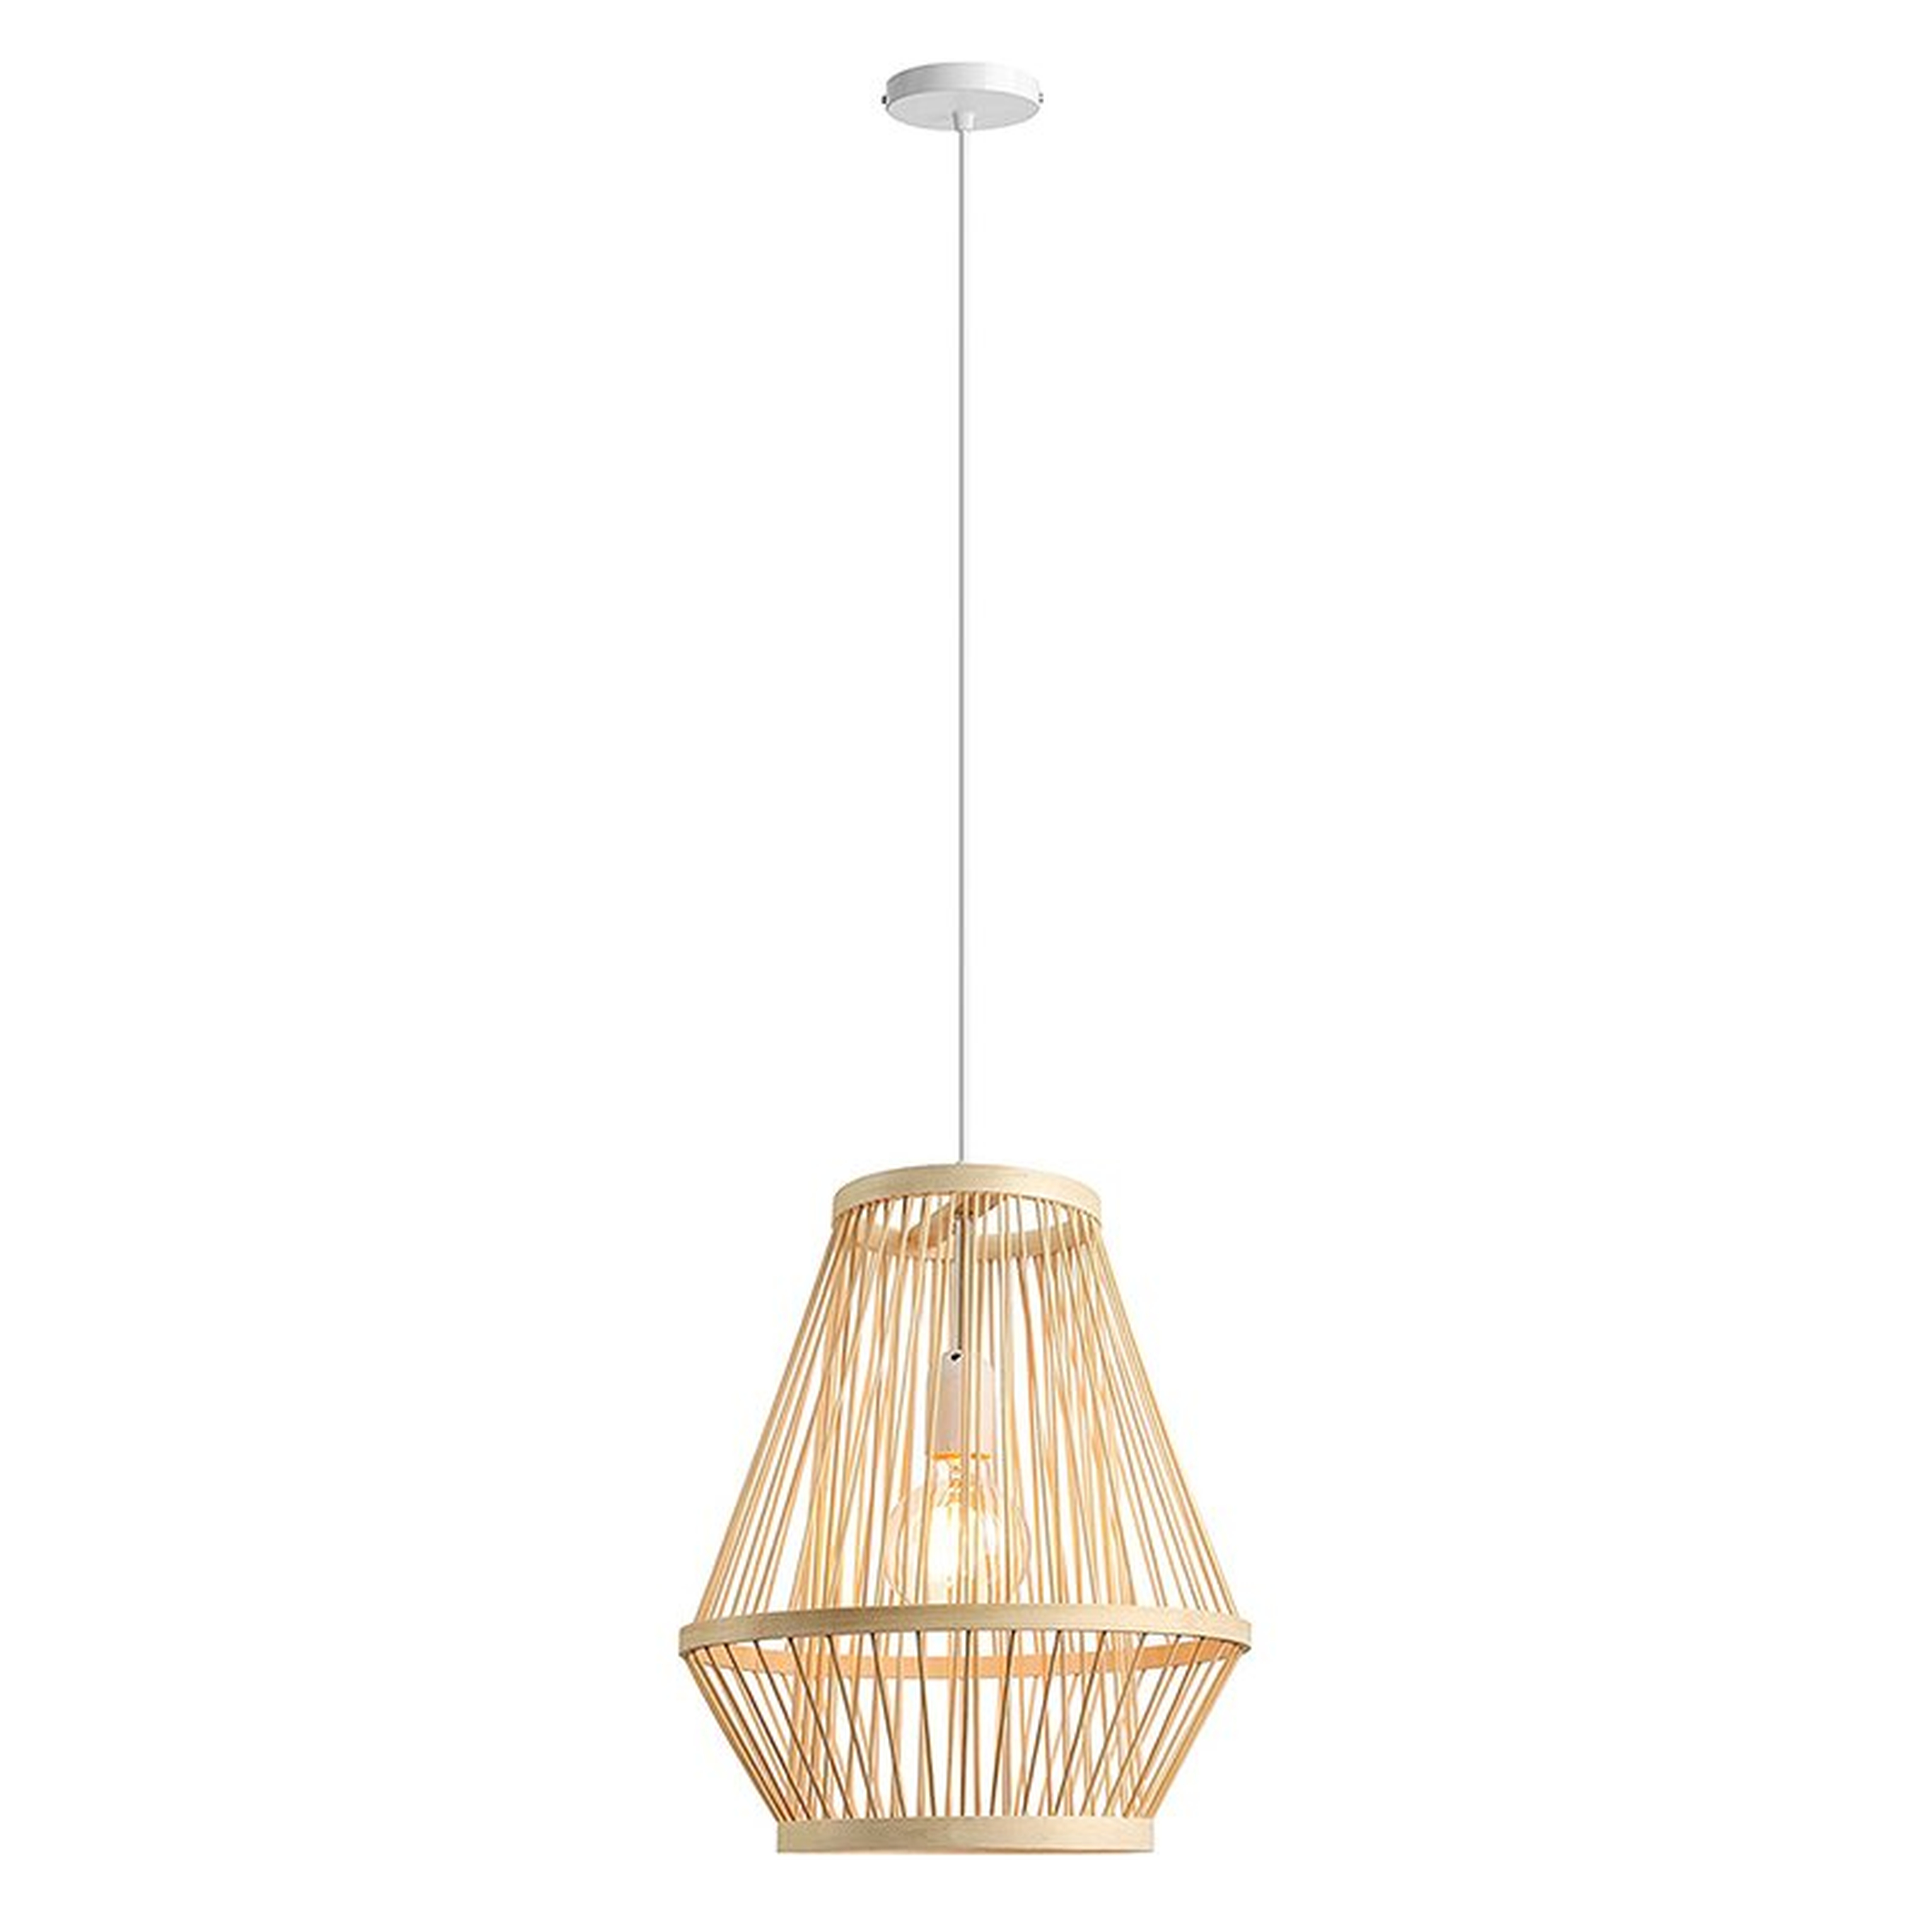 Bamboo Chandelier, Natural Chandelier Woven Hanging Ceiling Light 30CM/11.81 Inches, Used In Dining Room, Kitchen, Living Room - Wayfair